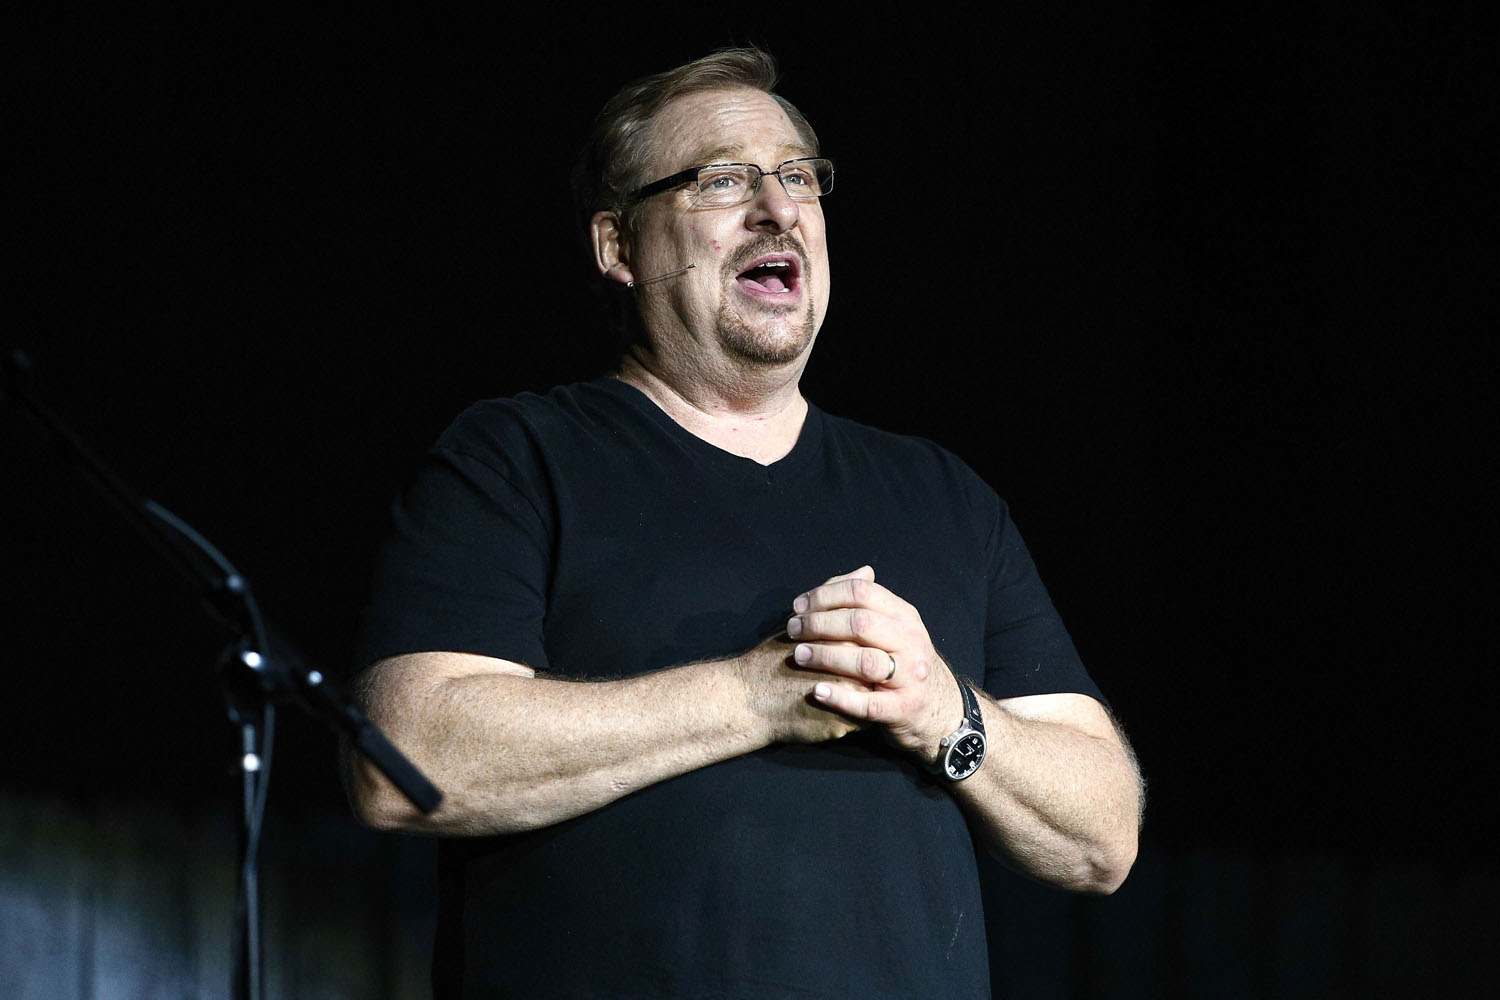 Pastor Rick Warren speaks onstage at 'The Bible: SON OF GOD Tour 2014' Kick-Off at Saddleback Church on March 20, 2014 in Lake Forest, Calif.